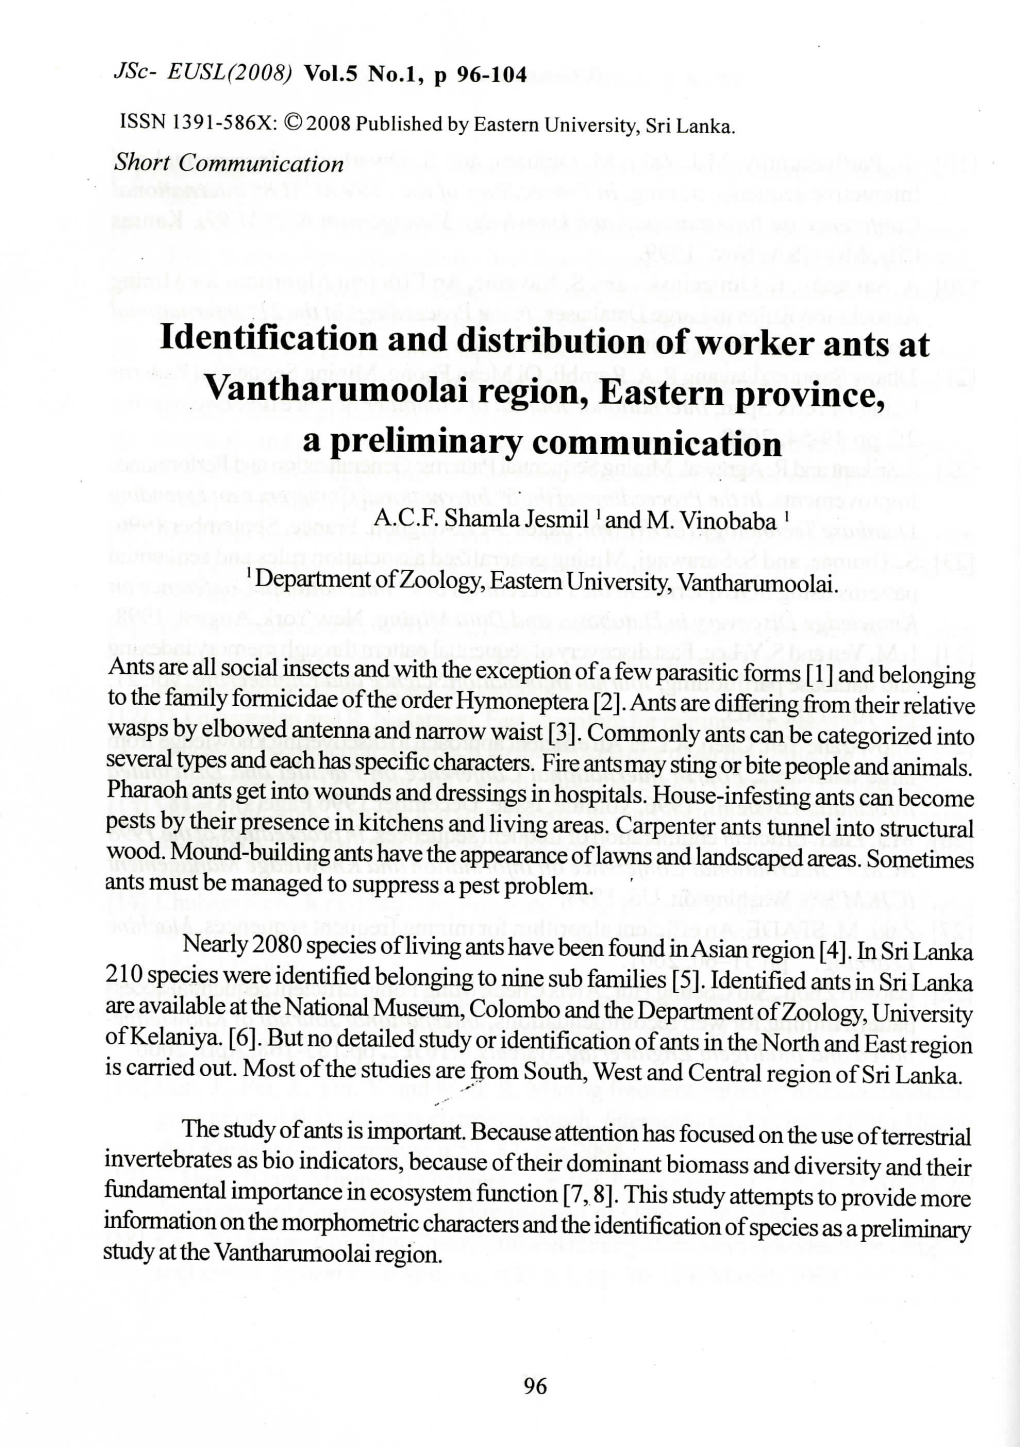 Identification and Distribution of Worker Ants at Vantharumoolai Region, Eastern Province, a Preliminary Communication